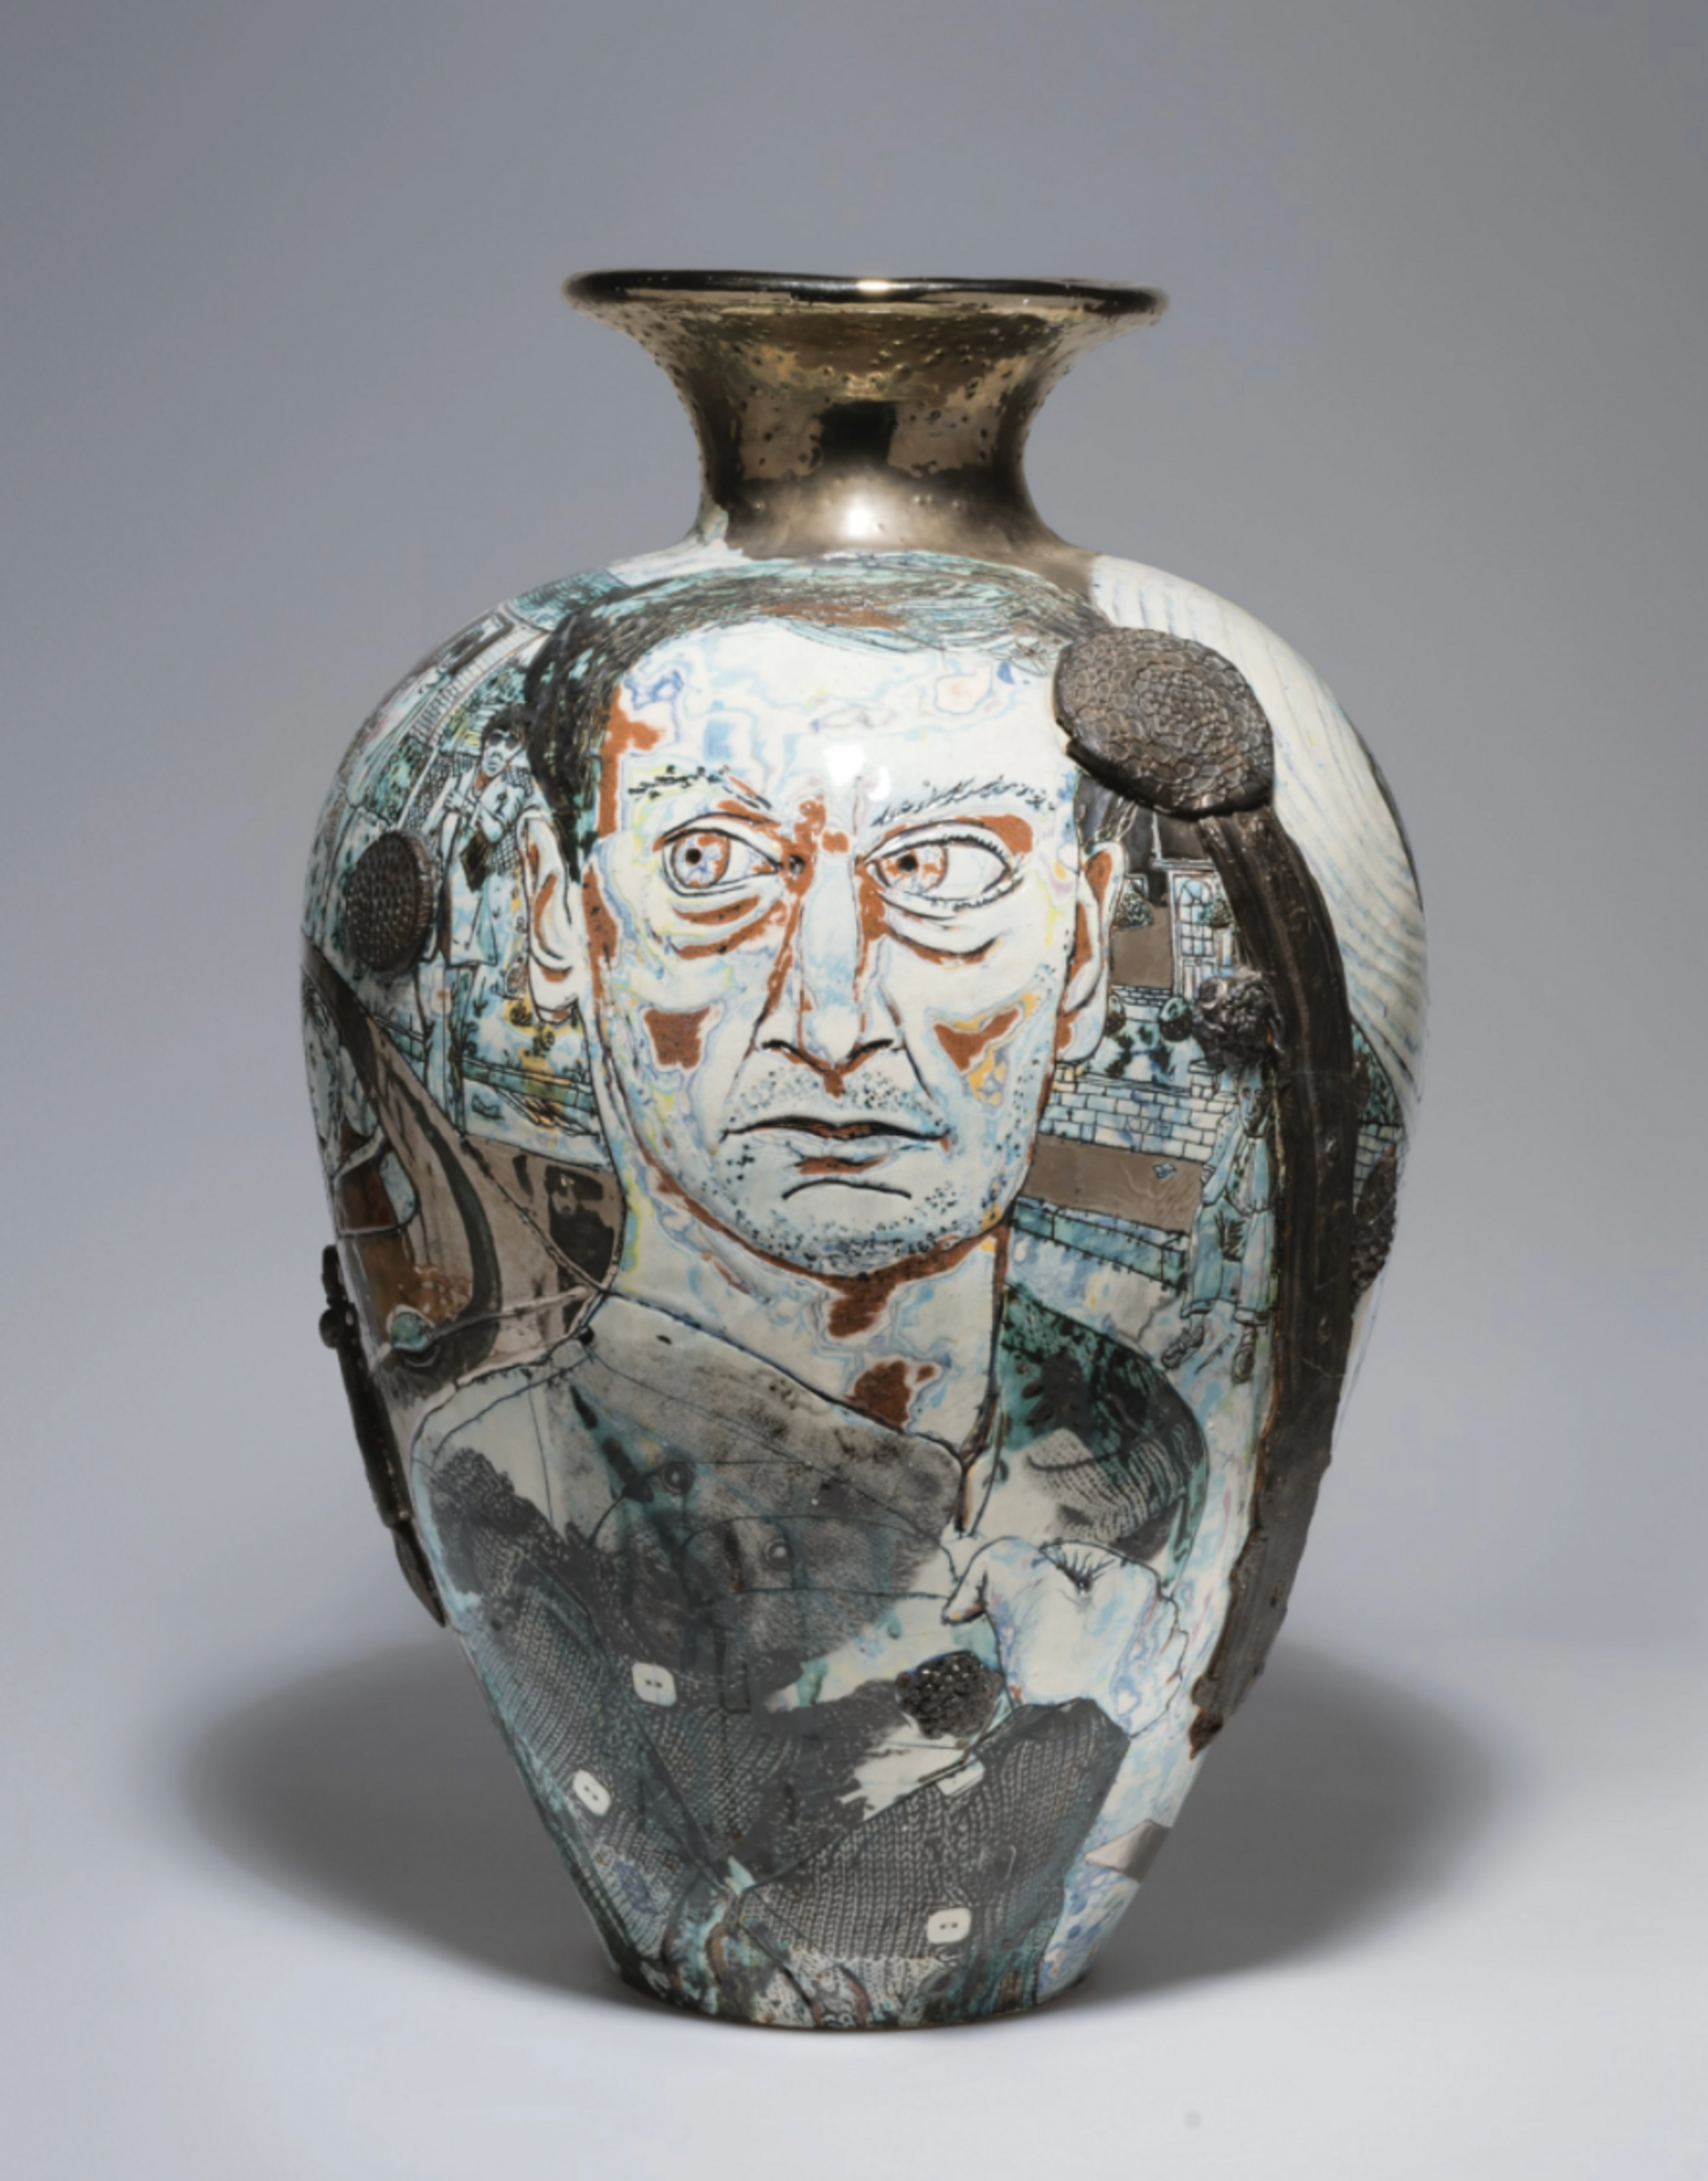 A detailed ceramic vase by Grayson Perry adorned with a rich array of characters (including Lucian Freud), text, and patterns, displaying Perry's distinctive use of traditional pottery to convey contemporary social commentary.